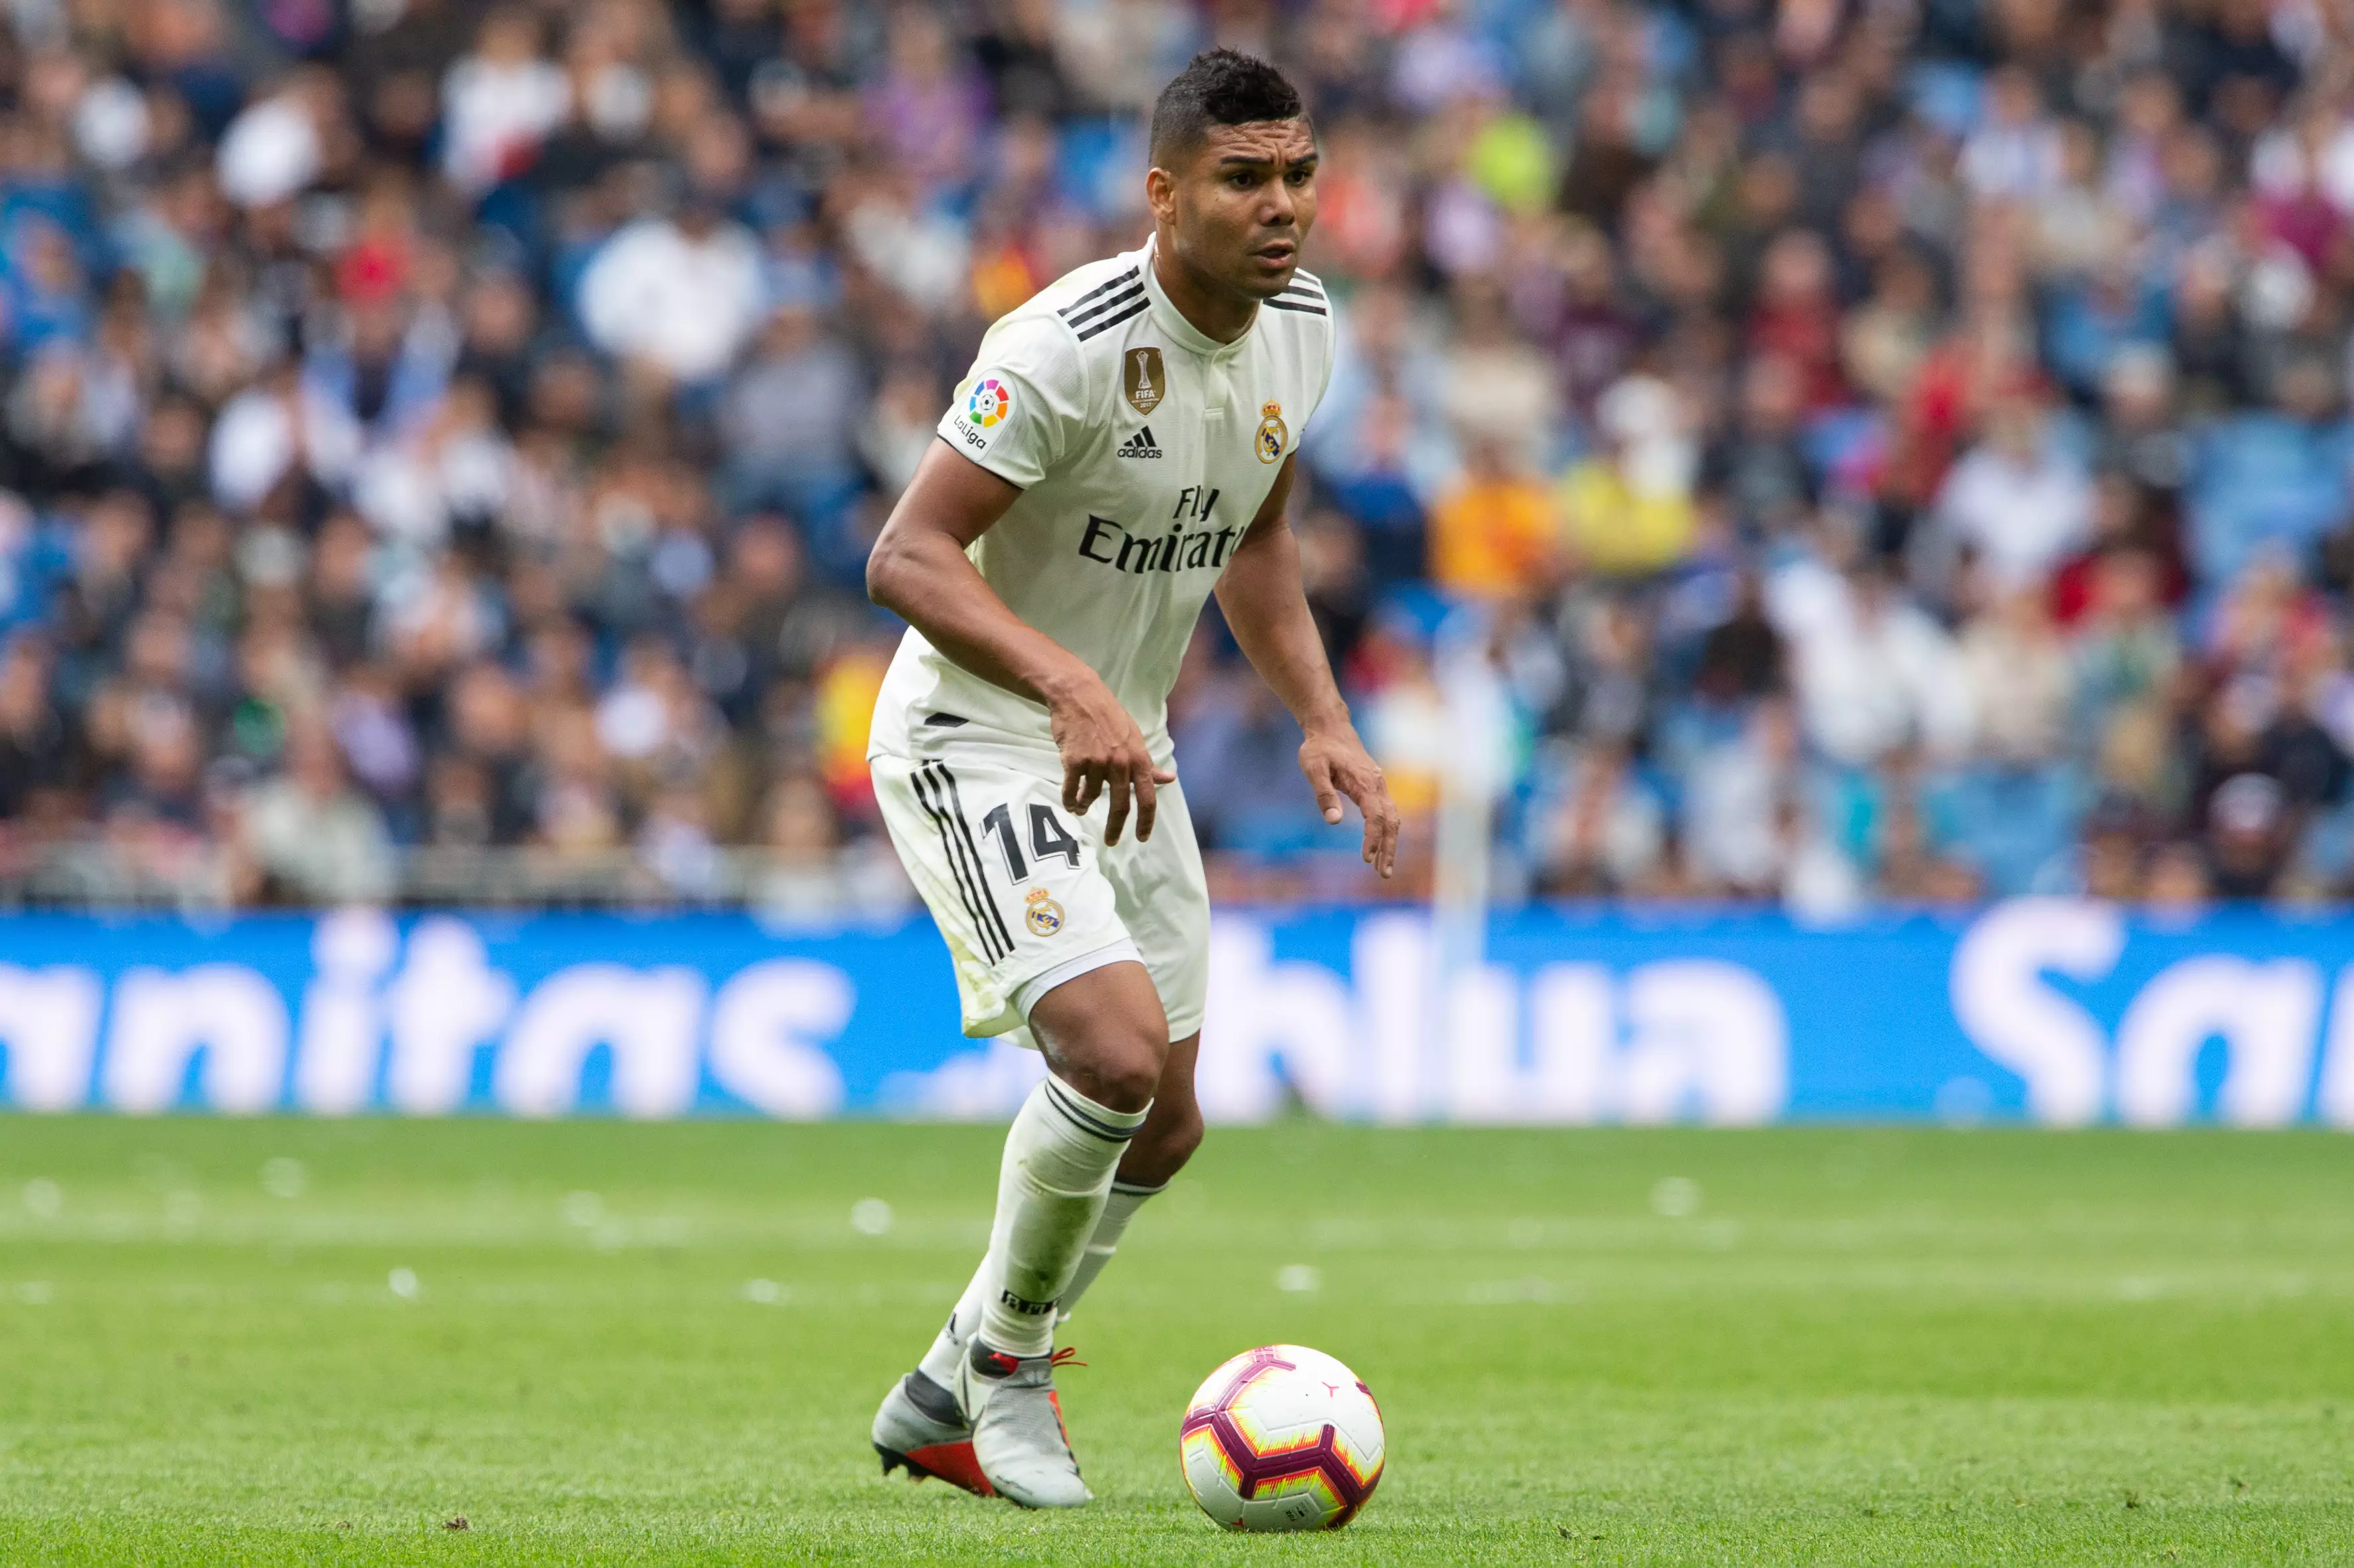 Casemiro becoming a Spanish national could help Bale. Image: PA Images